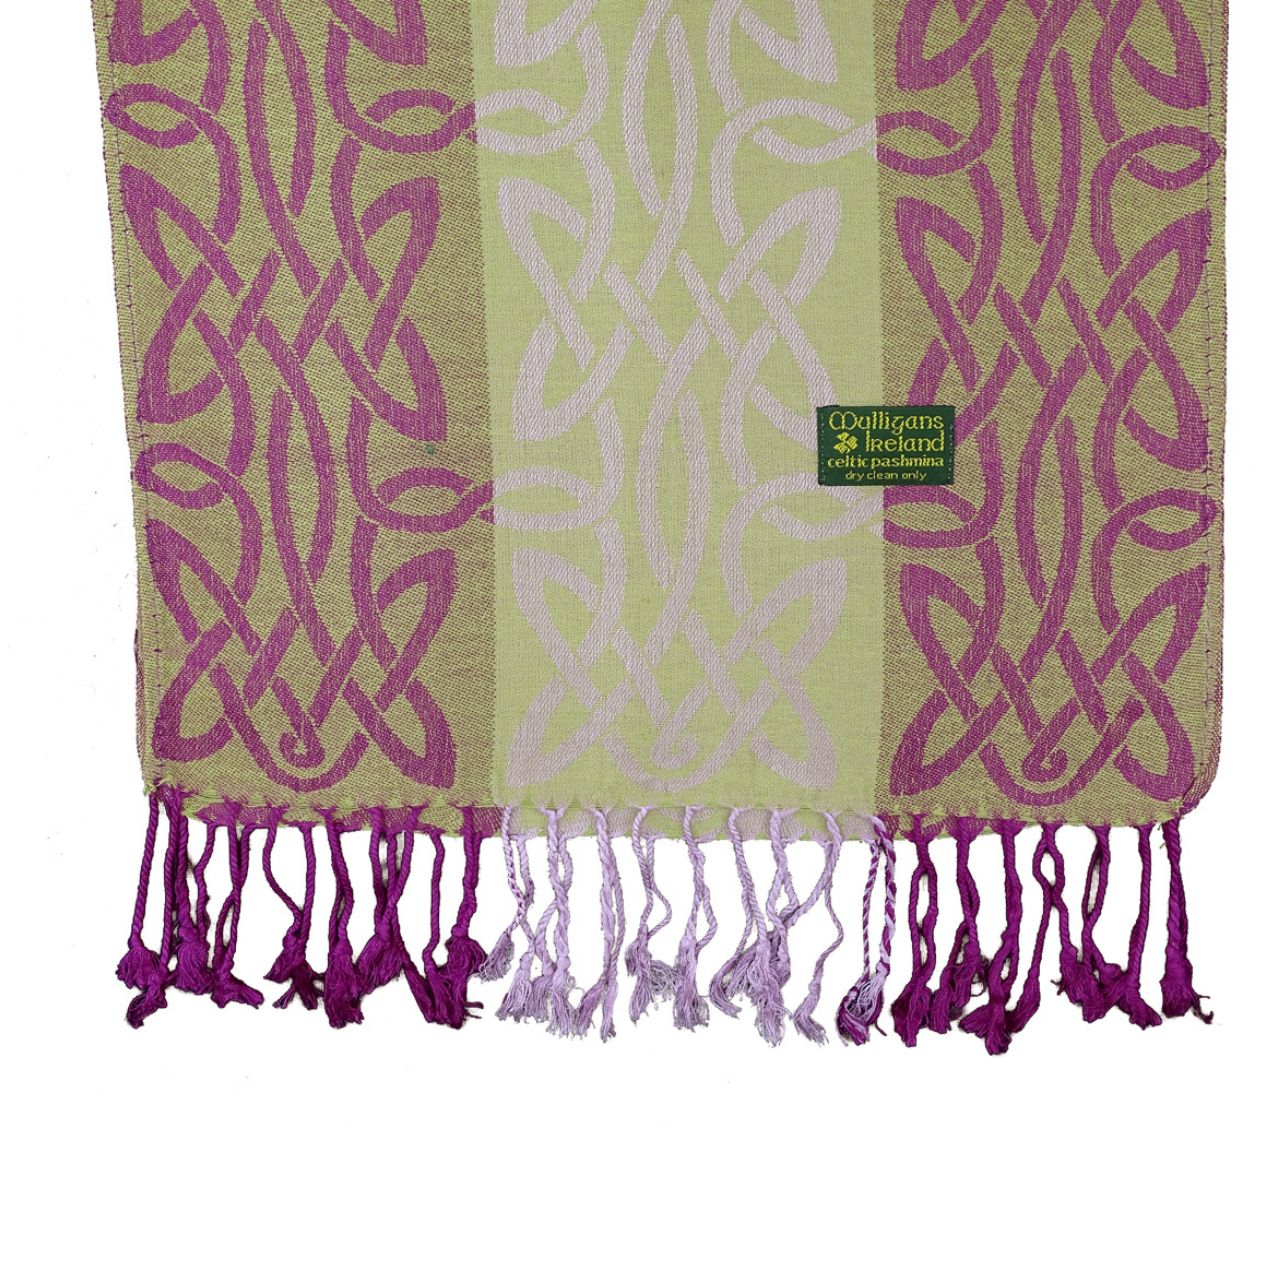 Mulligans Ireland Inishbofin Celtic Pashmina Scarf  Named after the islands of Ireland, and inspired by their stories and history, our Island Range of shawls and scarves is a fusion of modern Irish design and colour palette together with the traditional Celtic knot weave or ‘snaidhm celtic’ in Irish/Gaelic.